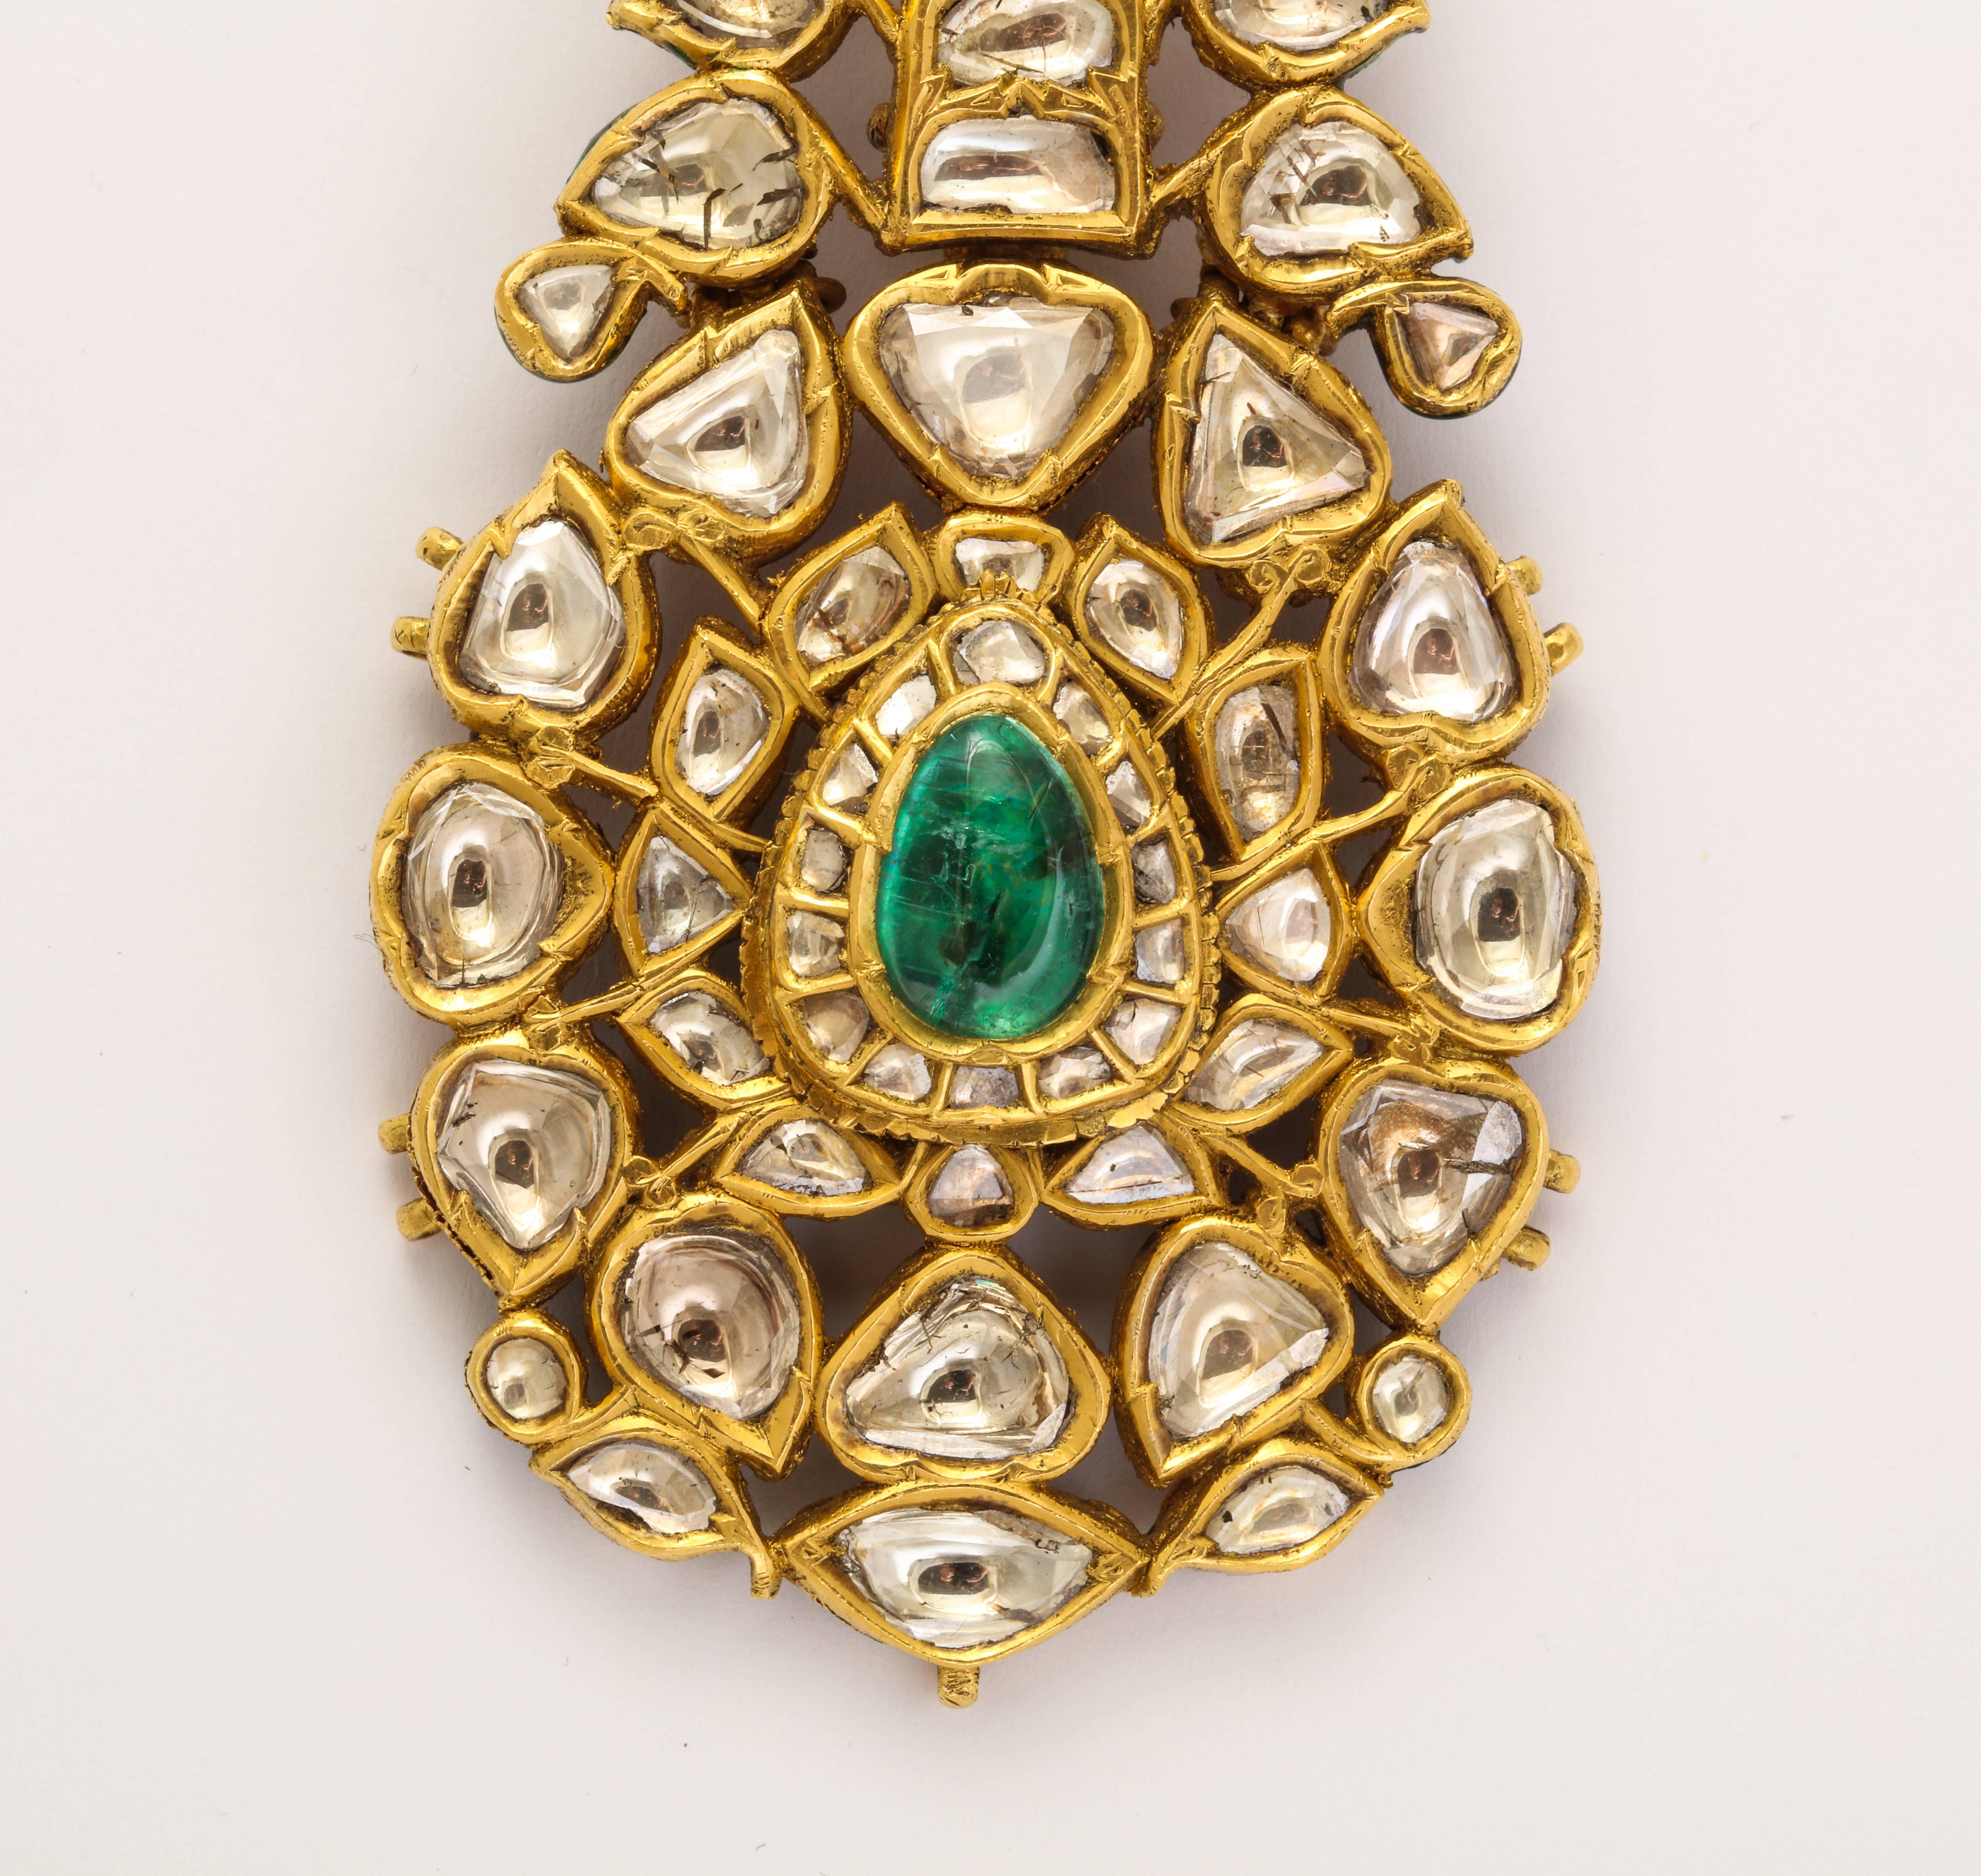 A very rare rose cut diamond, cabochon emerald enamel on 22 karat gold Sarpech/turban ornament,

Can be used as a brooch or a pendant

Depicted in full page spread in the 